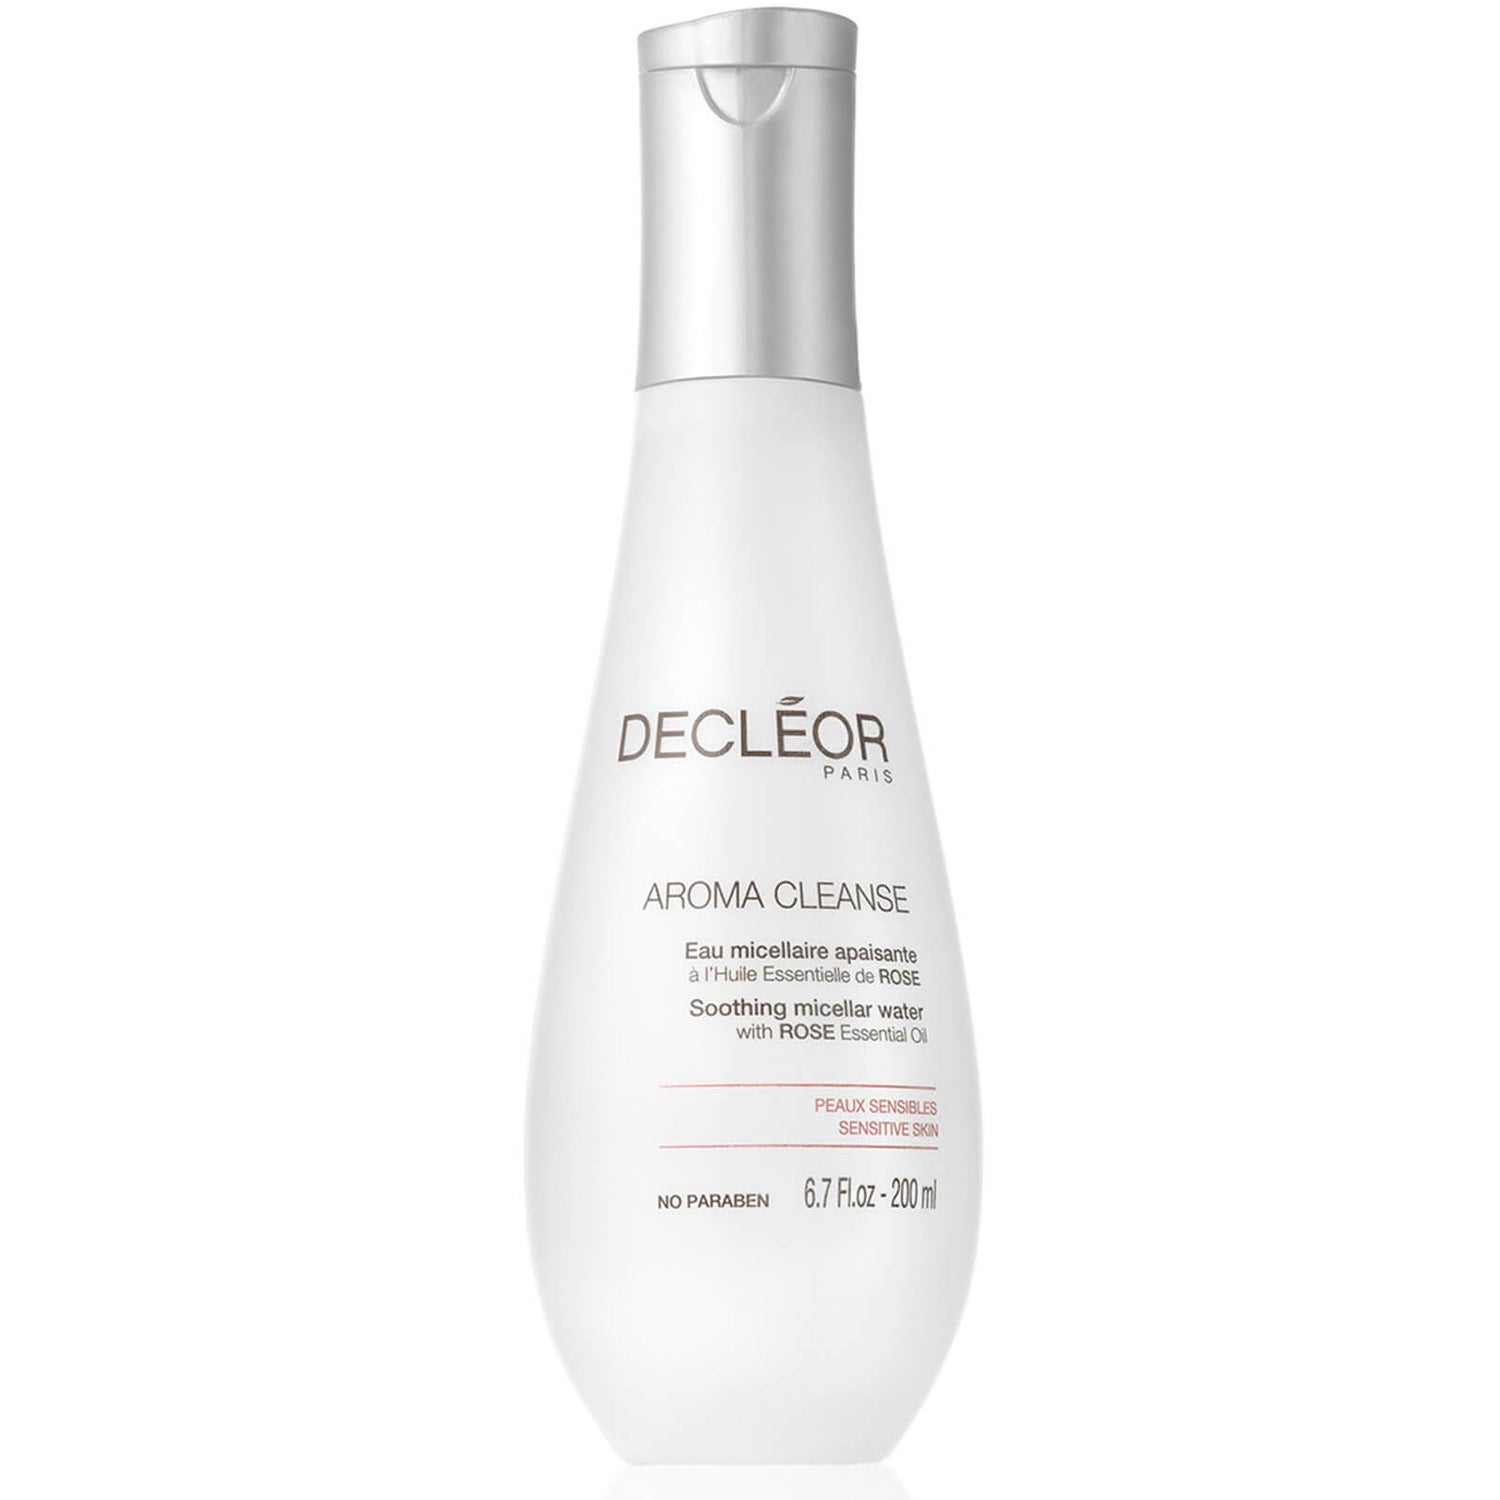 DECLÉOR Aroma Cleanse Soothing Micellar Water (200ml)